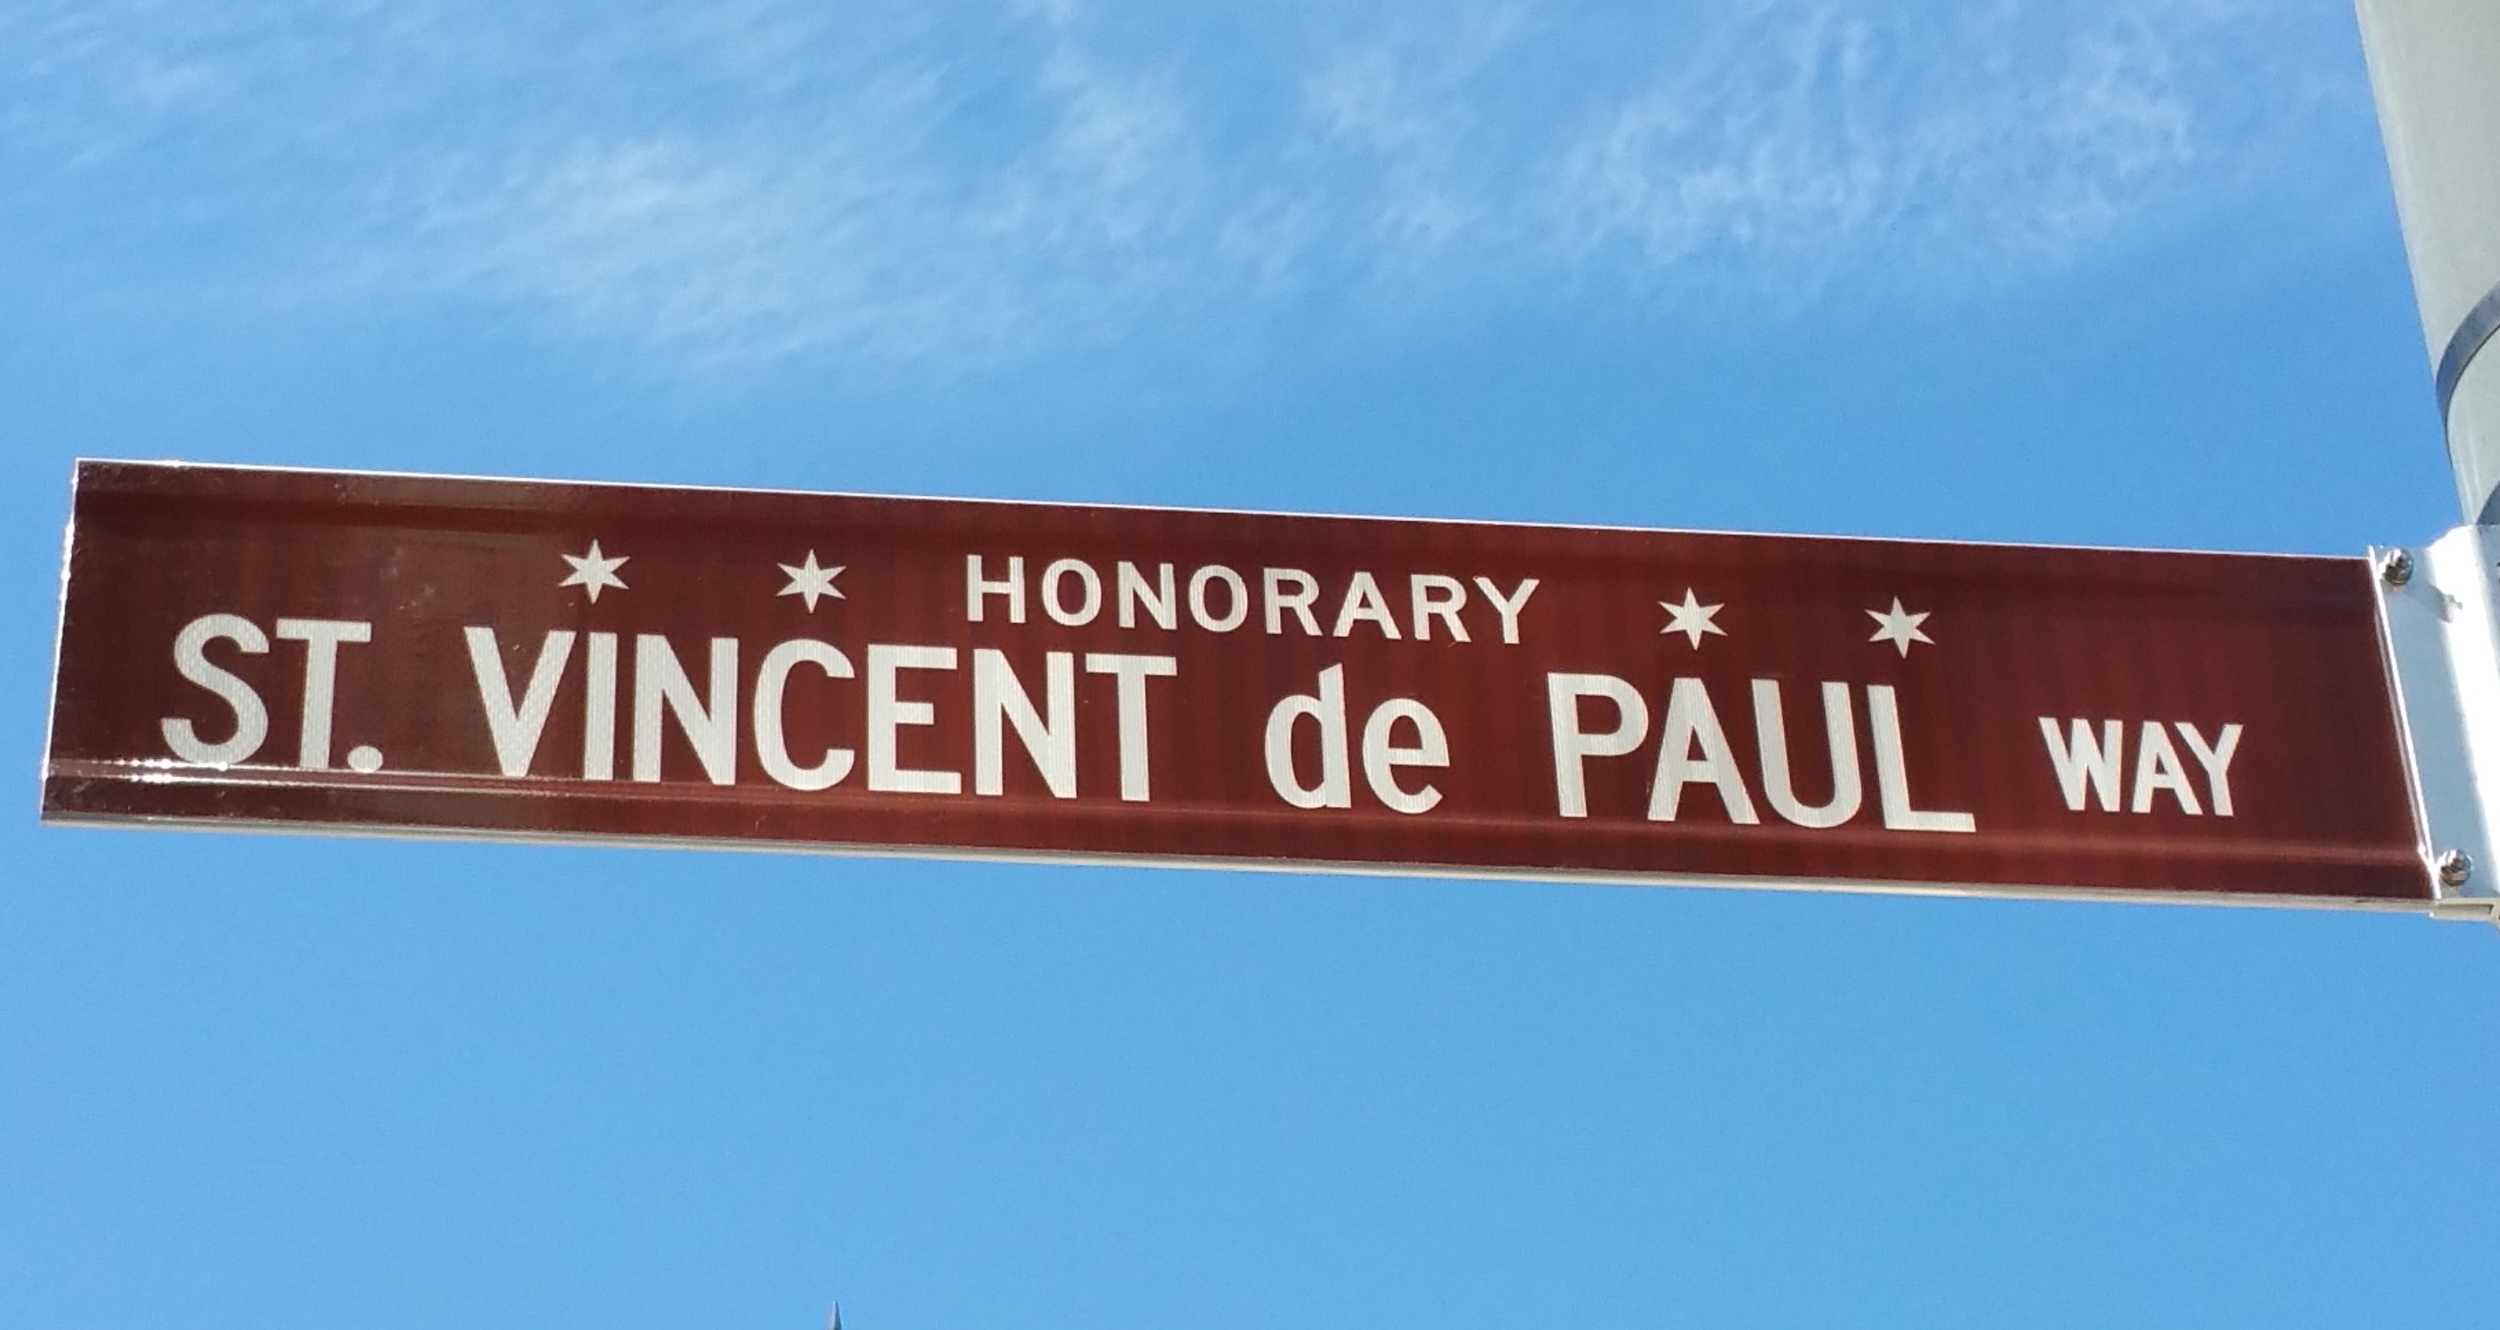 St Vincent de Paul Way - Honorary Chicago sign